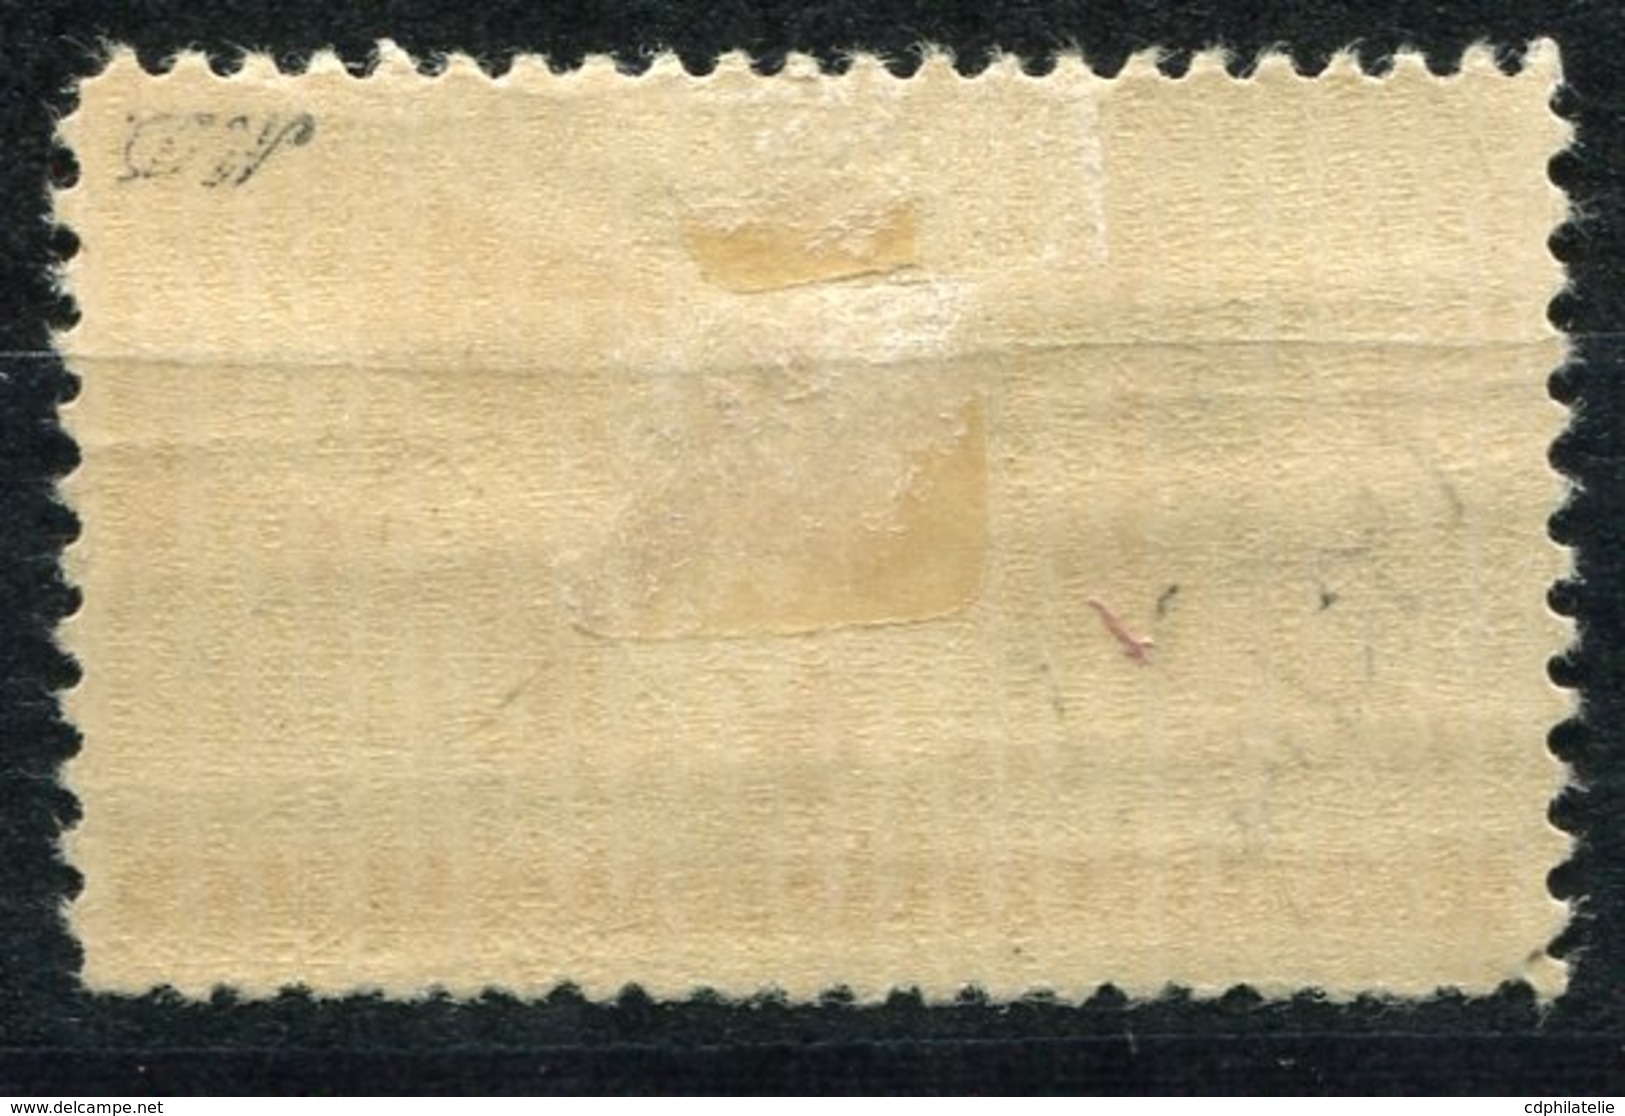 FRANCE POSTE NAVALE LE 6 CENTS U.S.A. SURCHARGE RF (ALGER TYPE III) N°18 * - Military Airmail